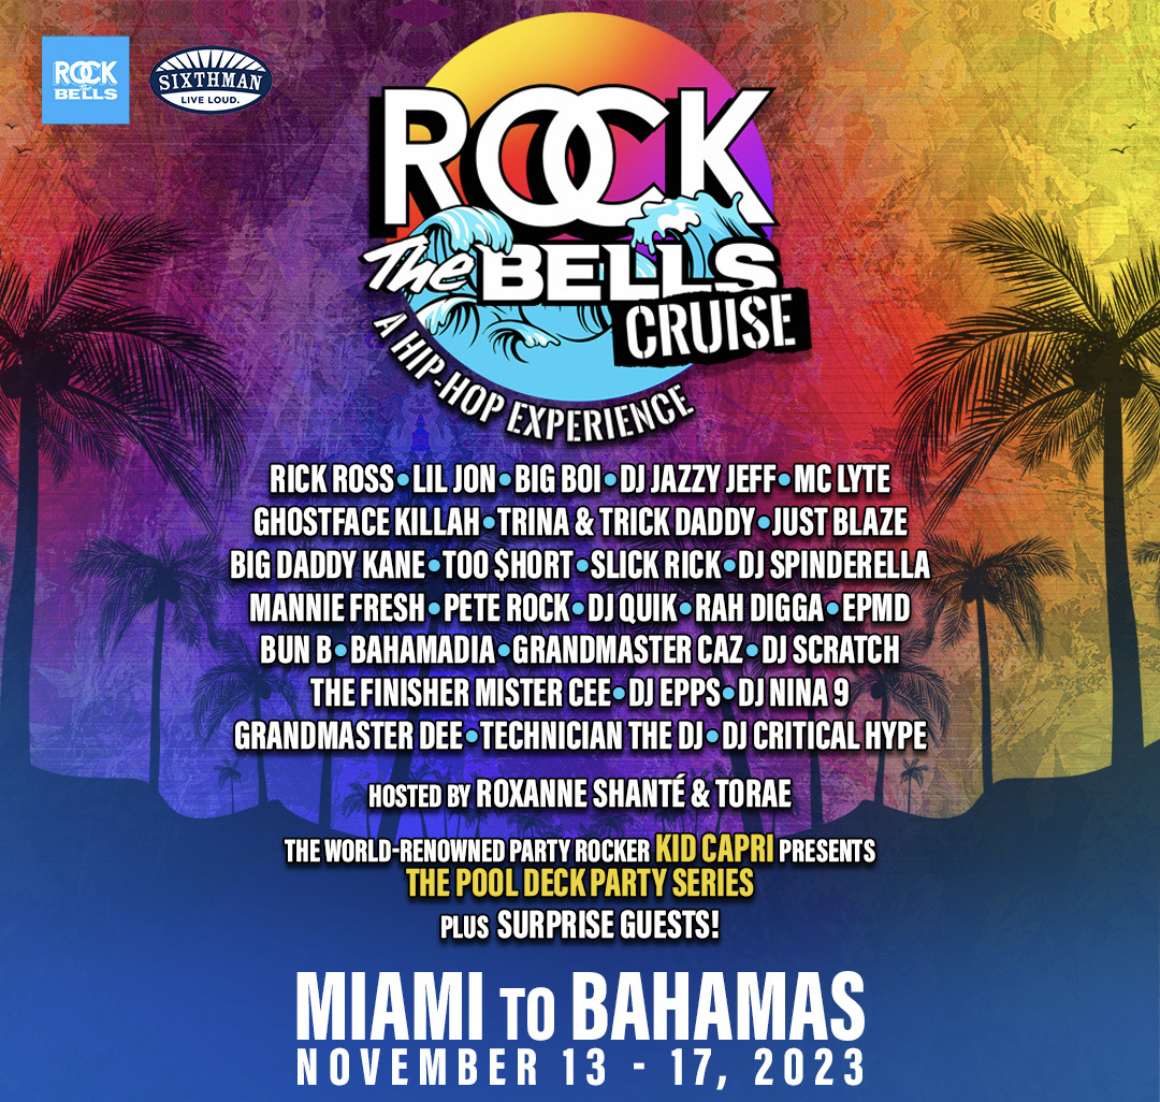 Rock the Bells Cruise